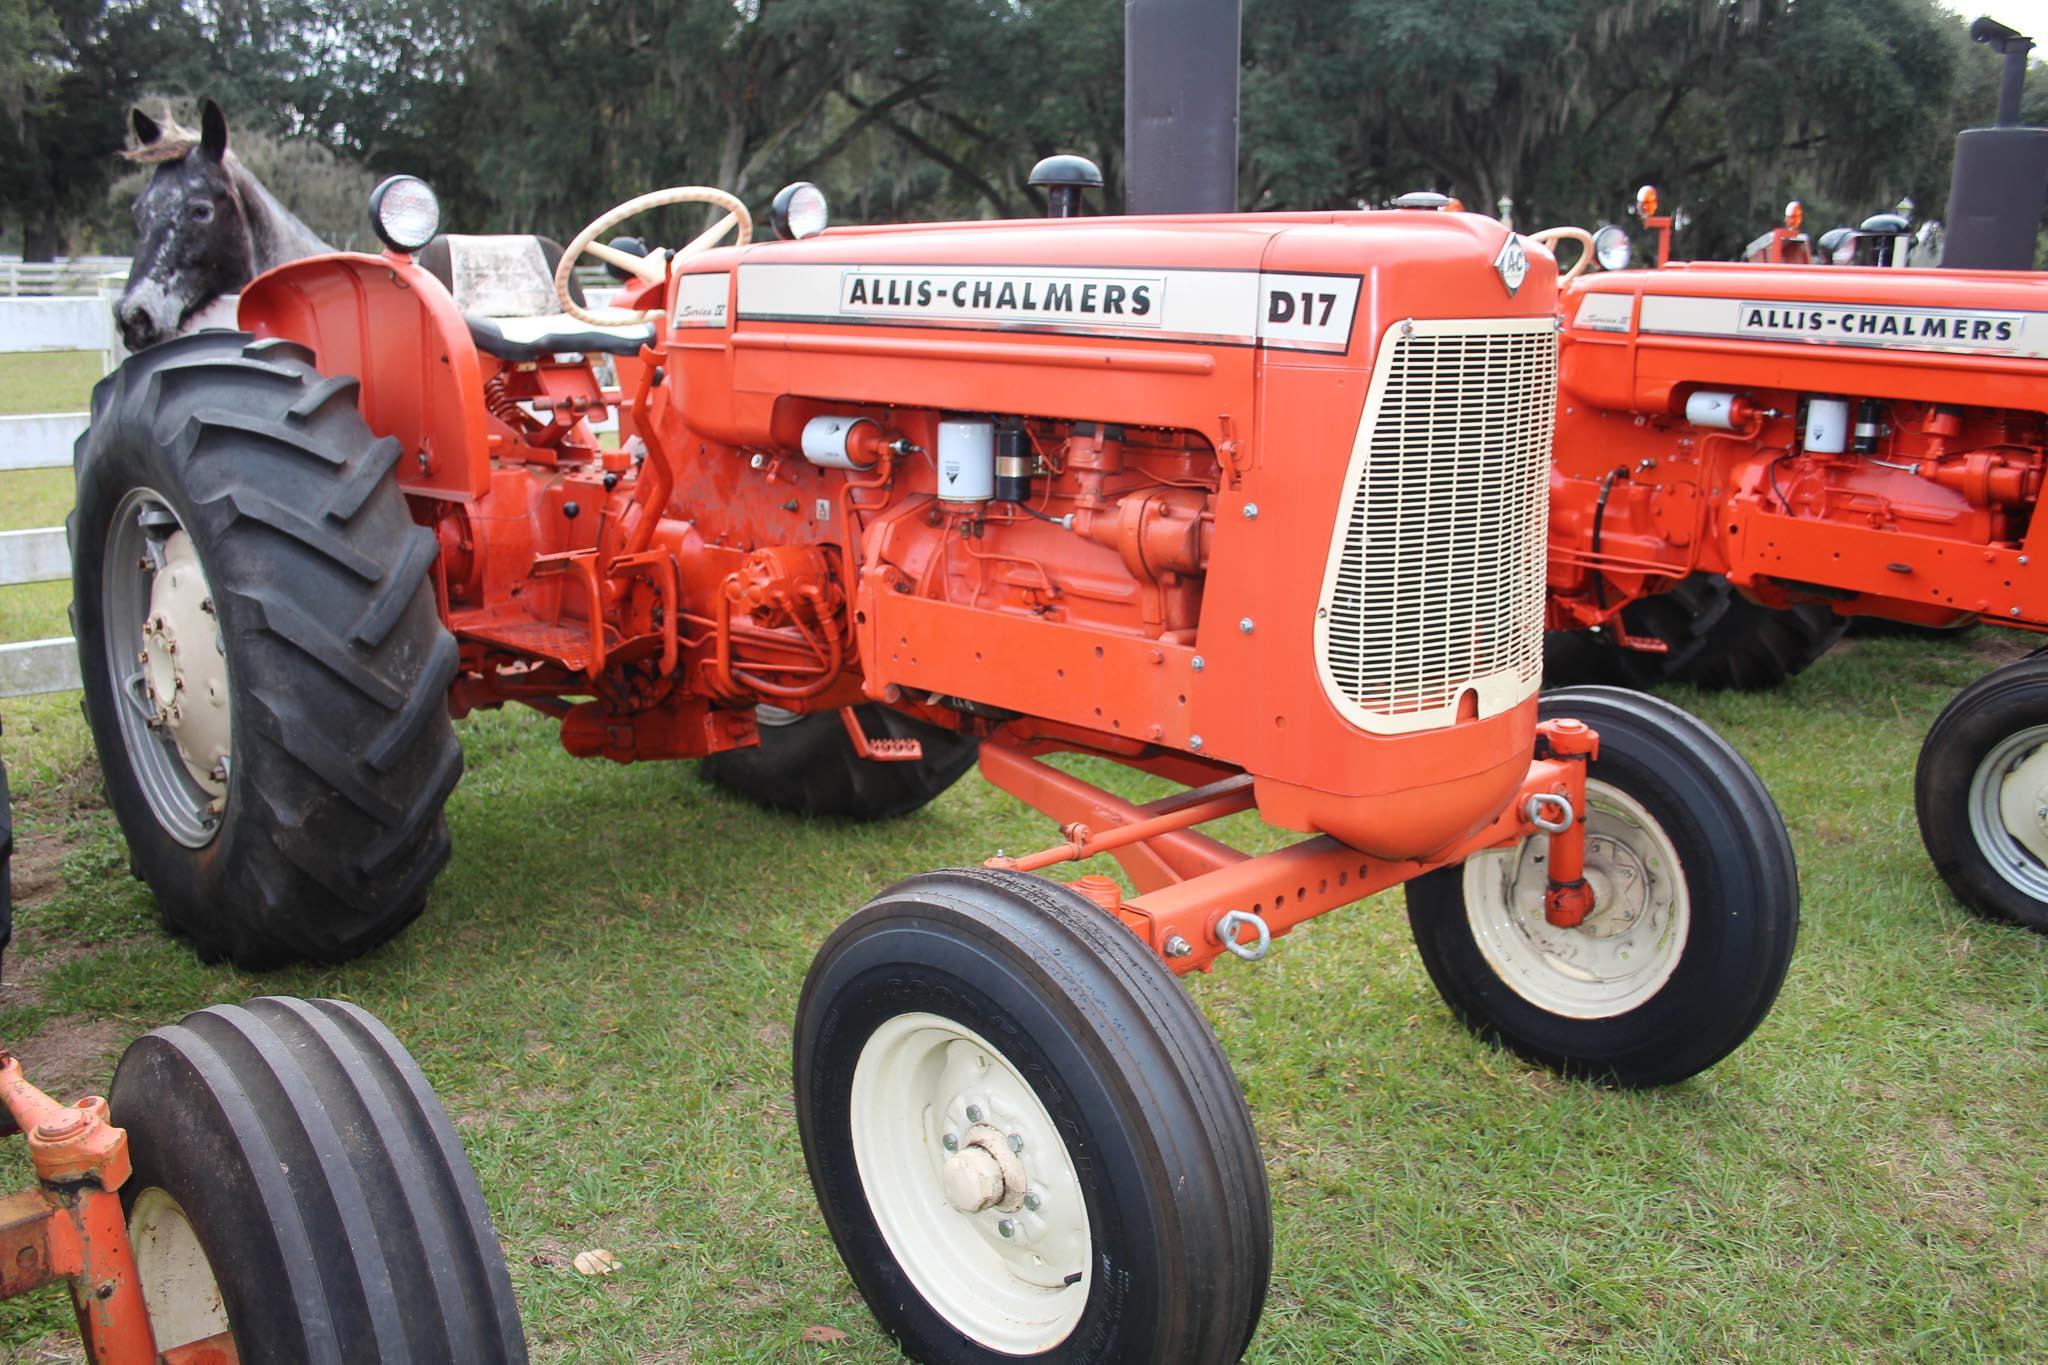 Allis Chalmers D17 tractor